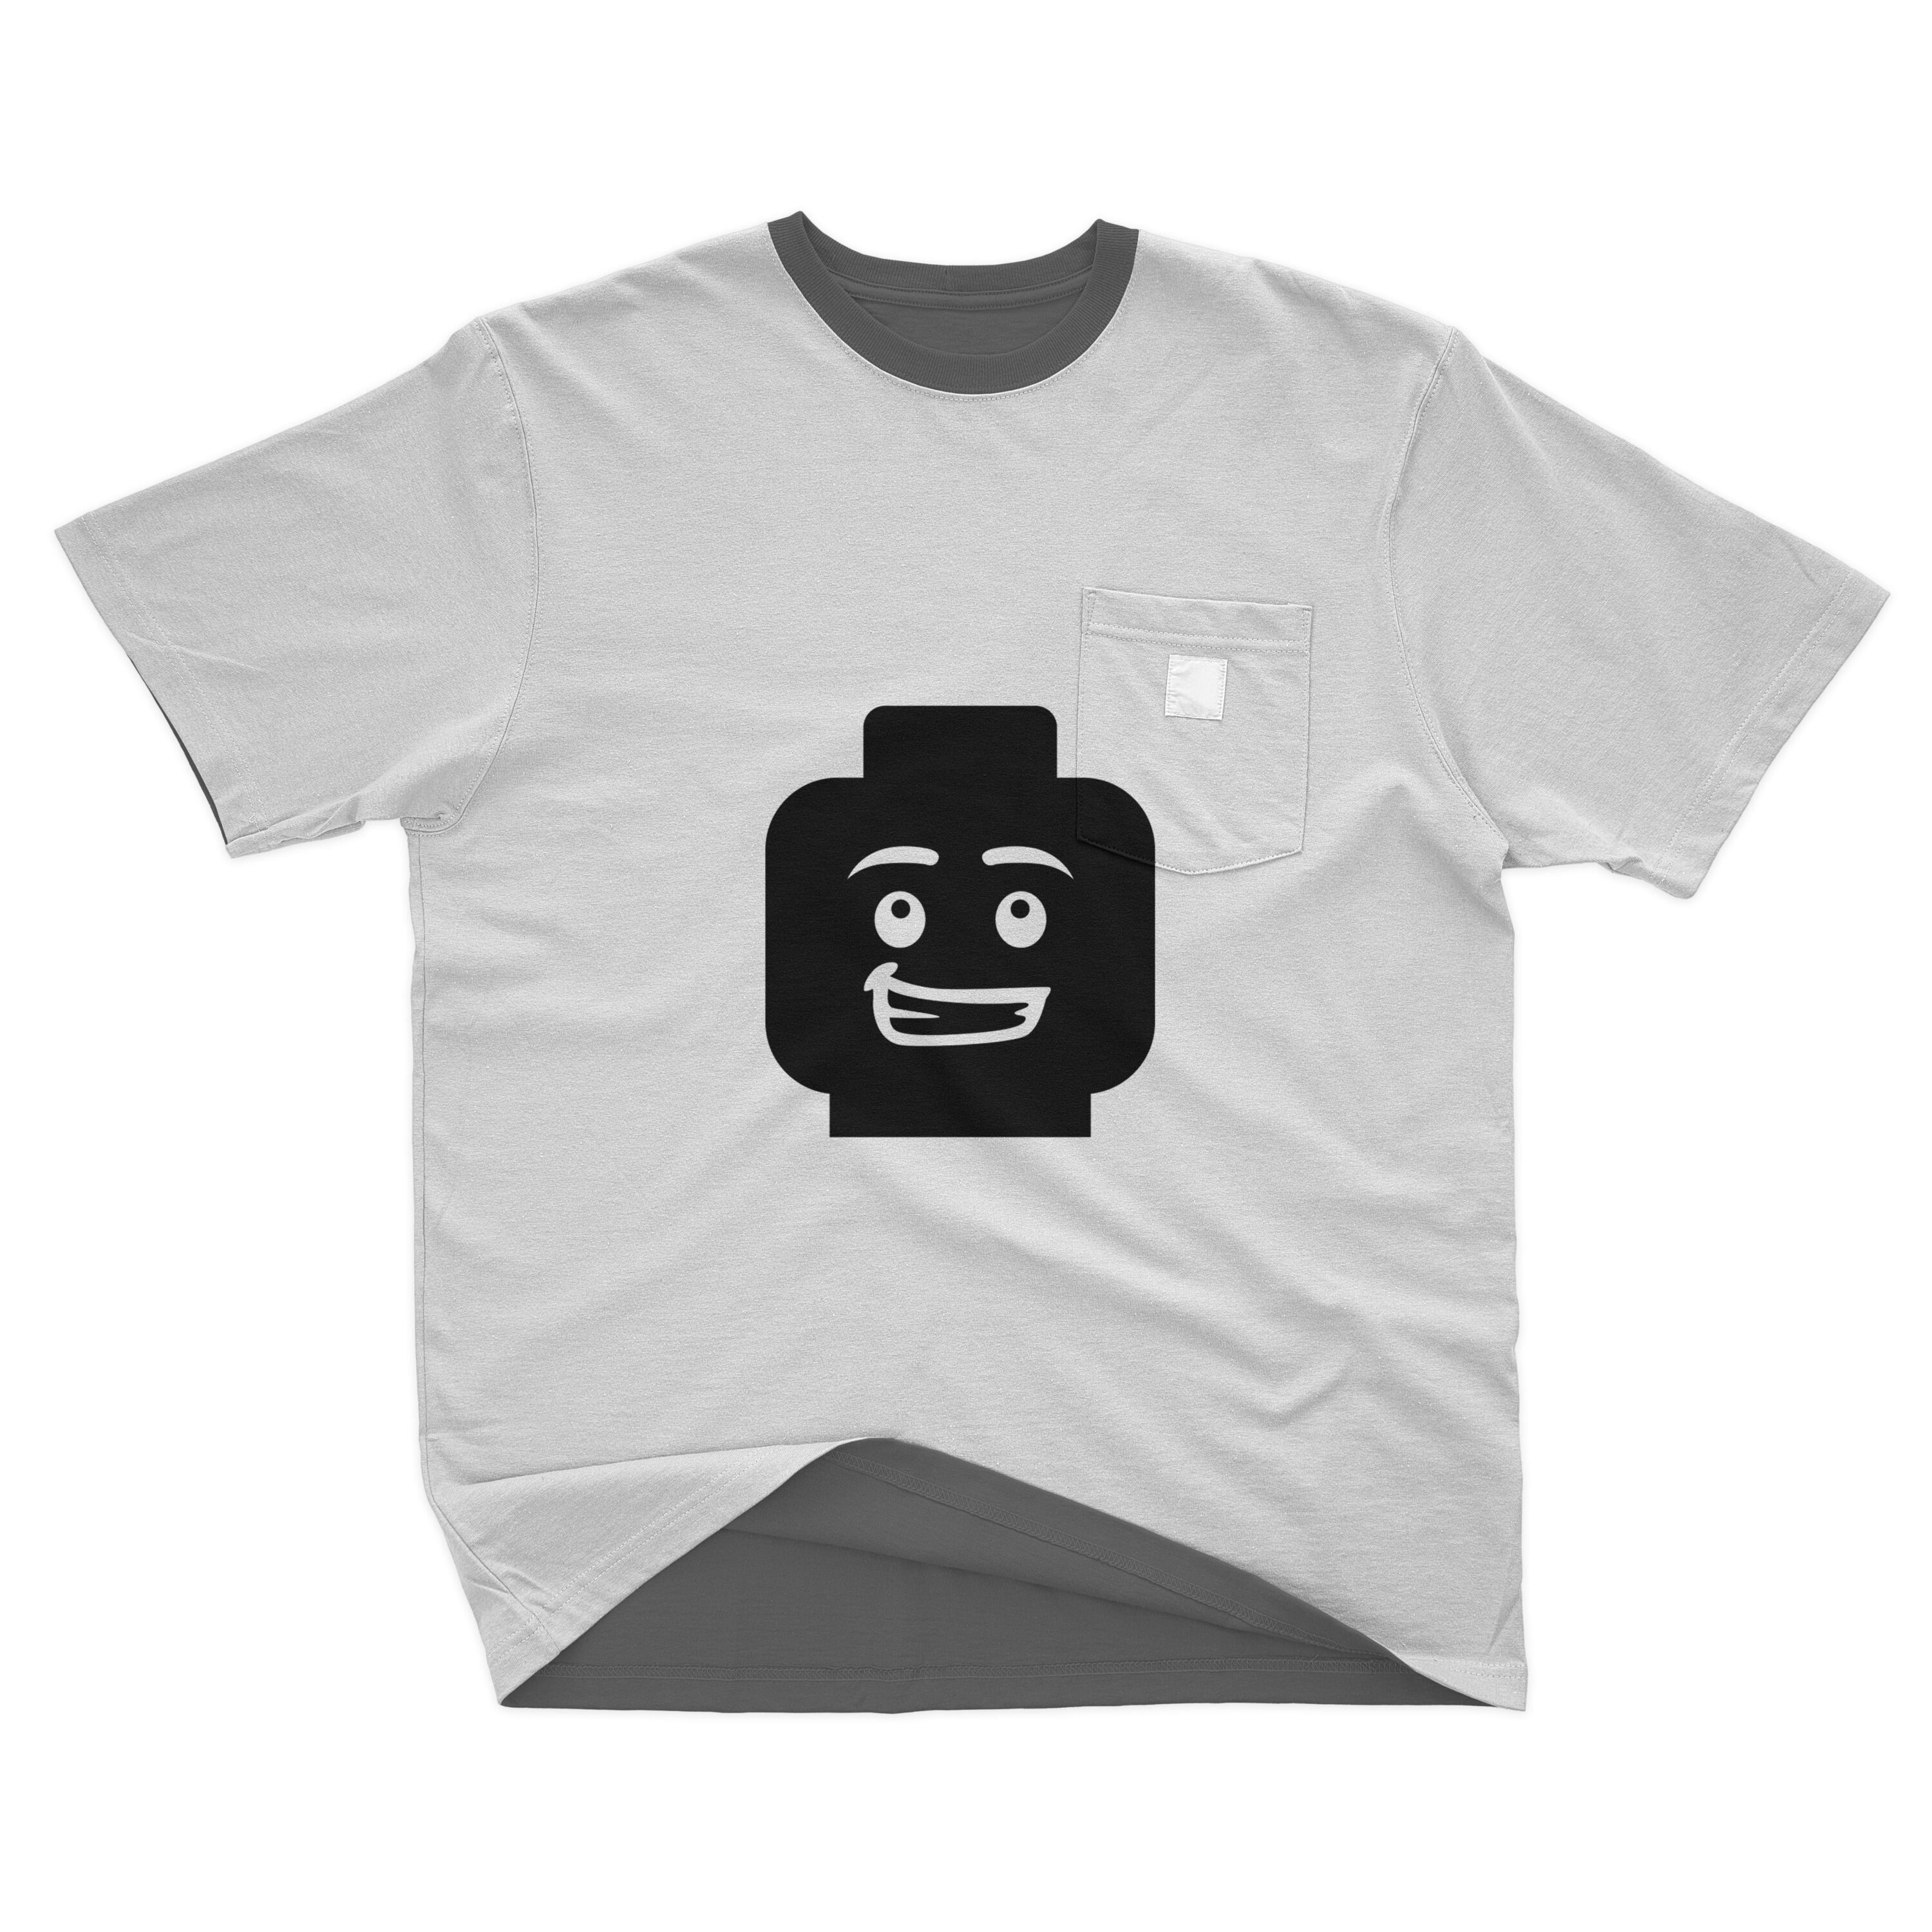 T-shirt design with smiling lego man.